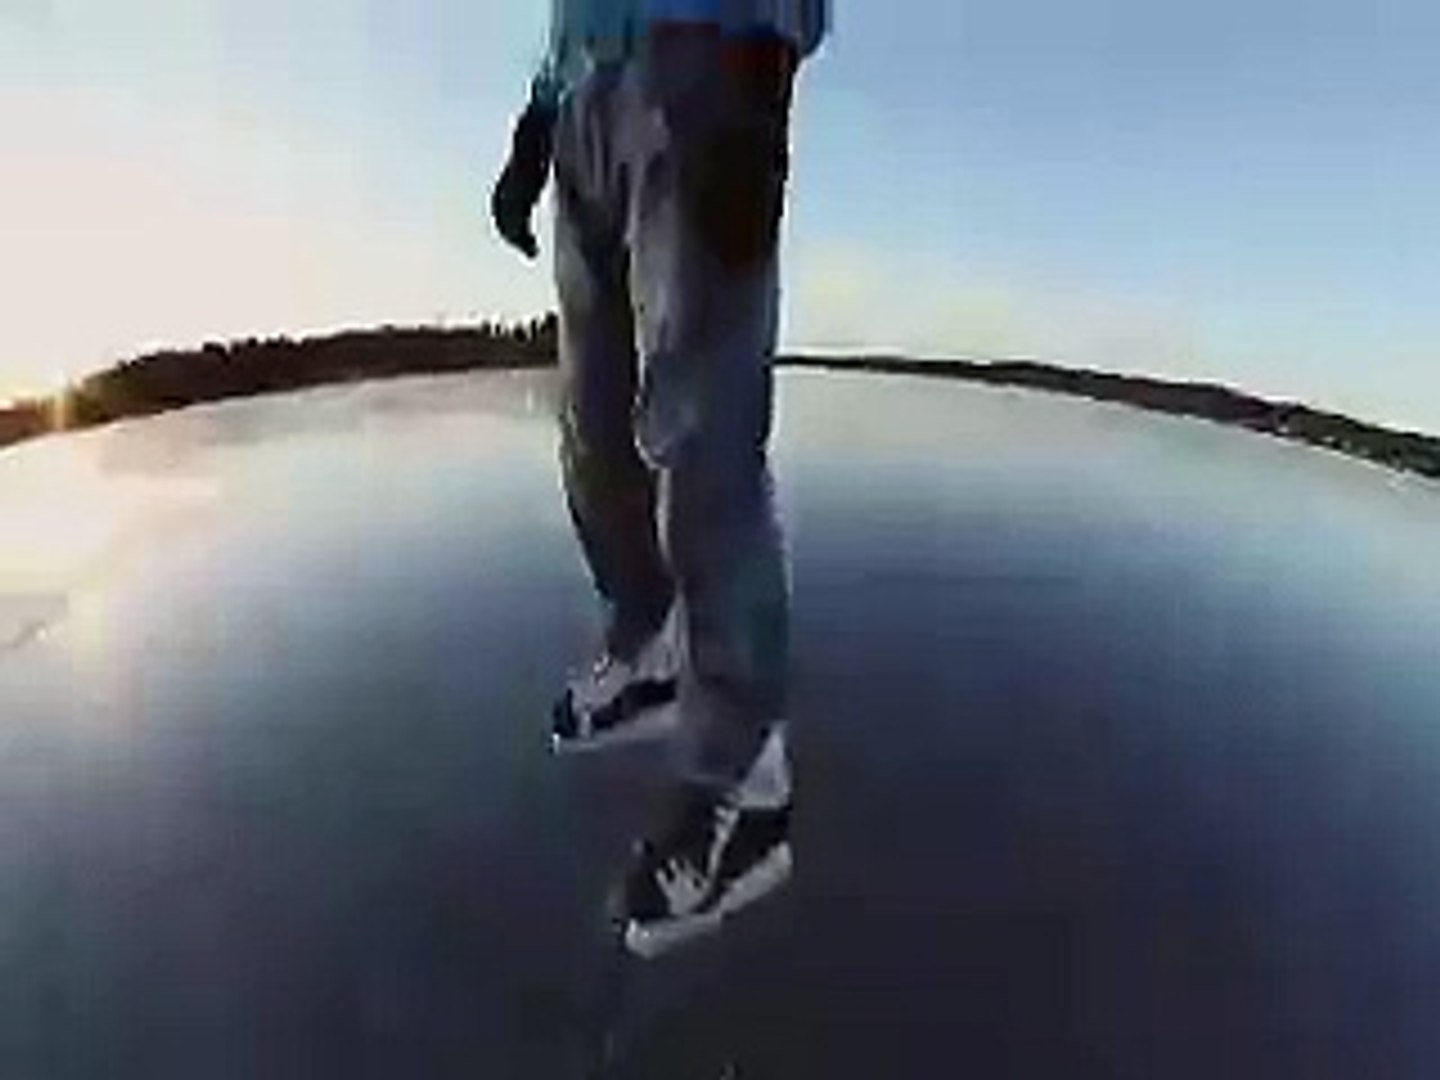 Ice Skating On A Crystal Clear Lake